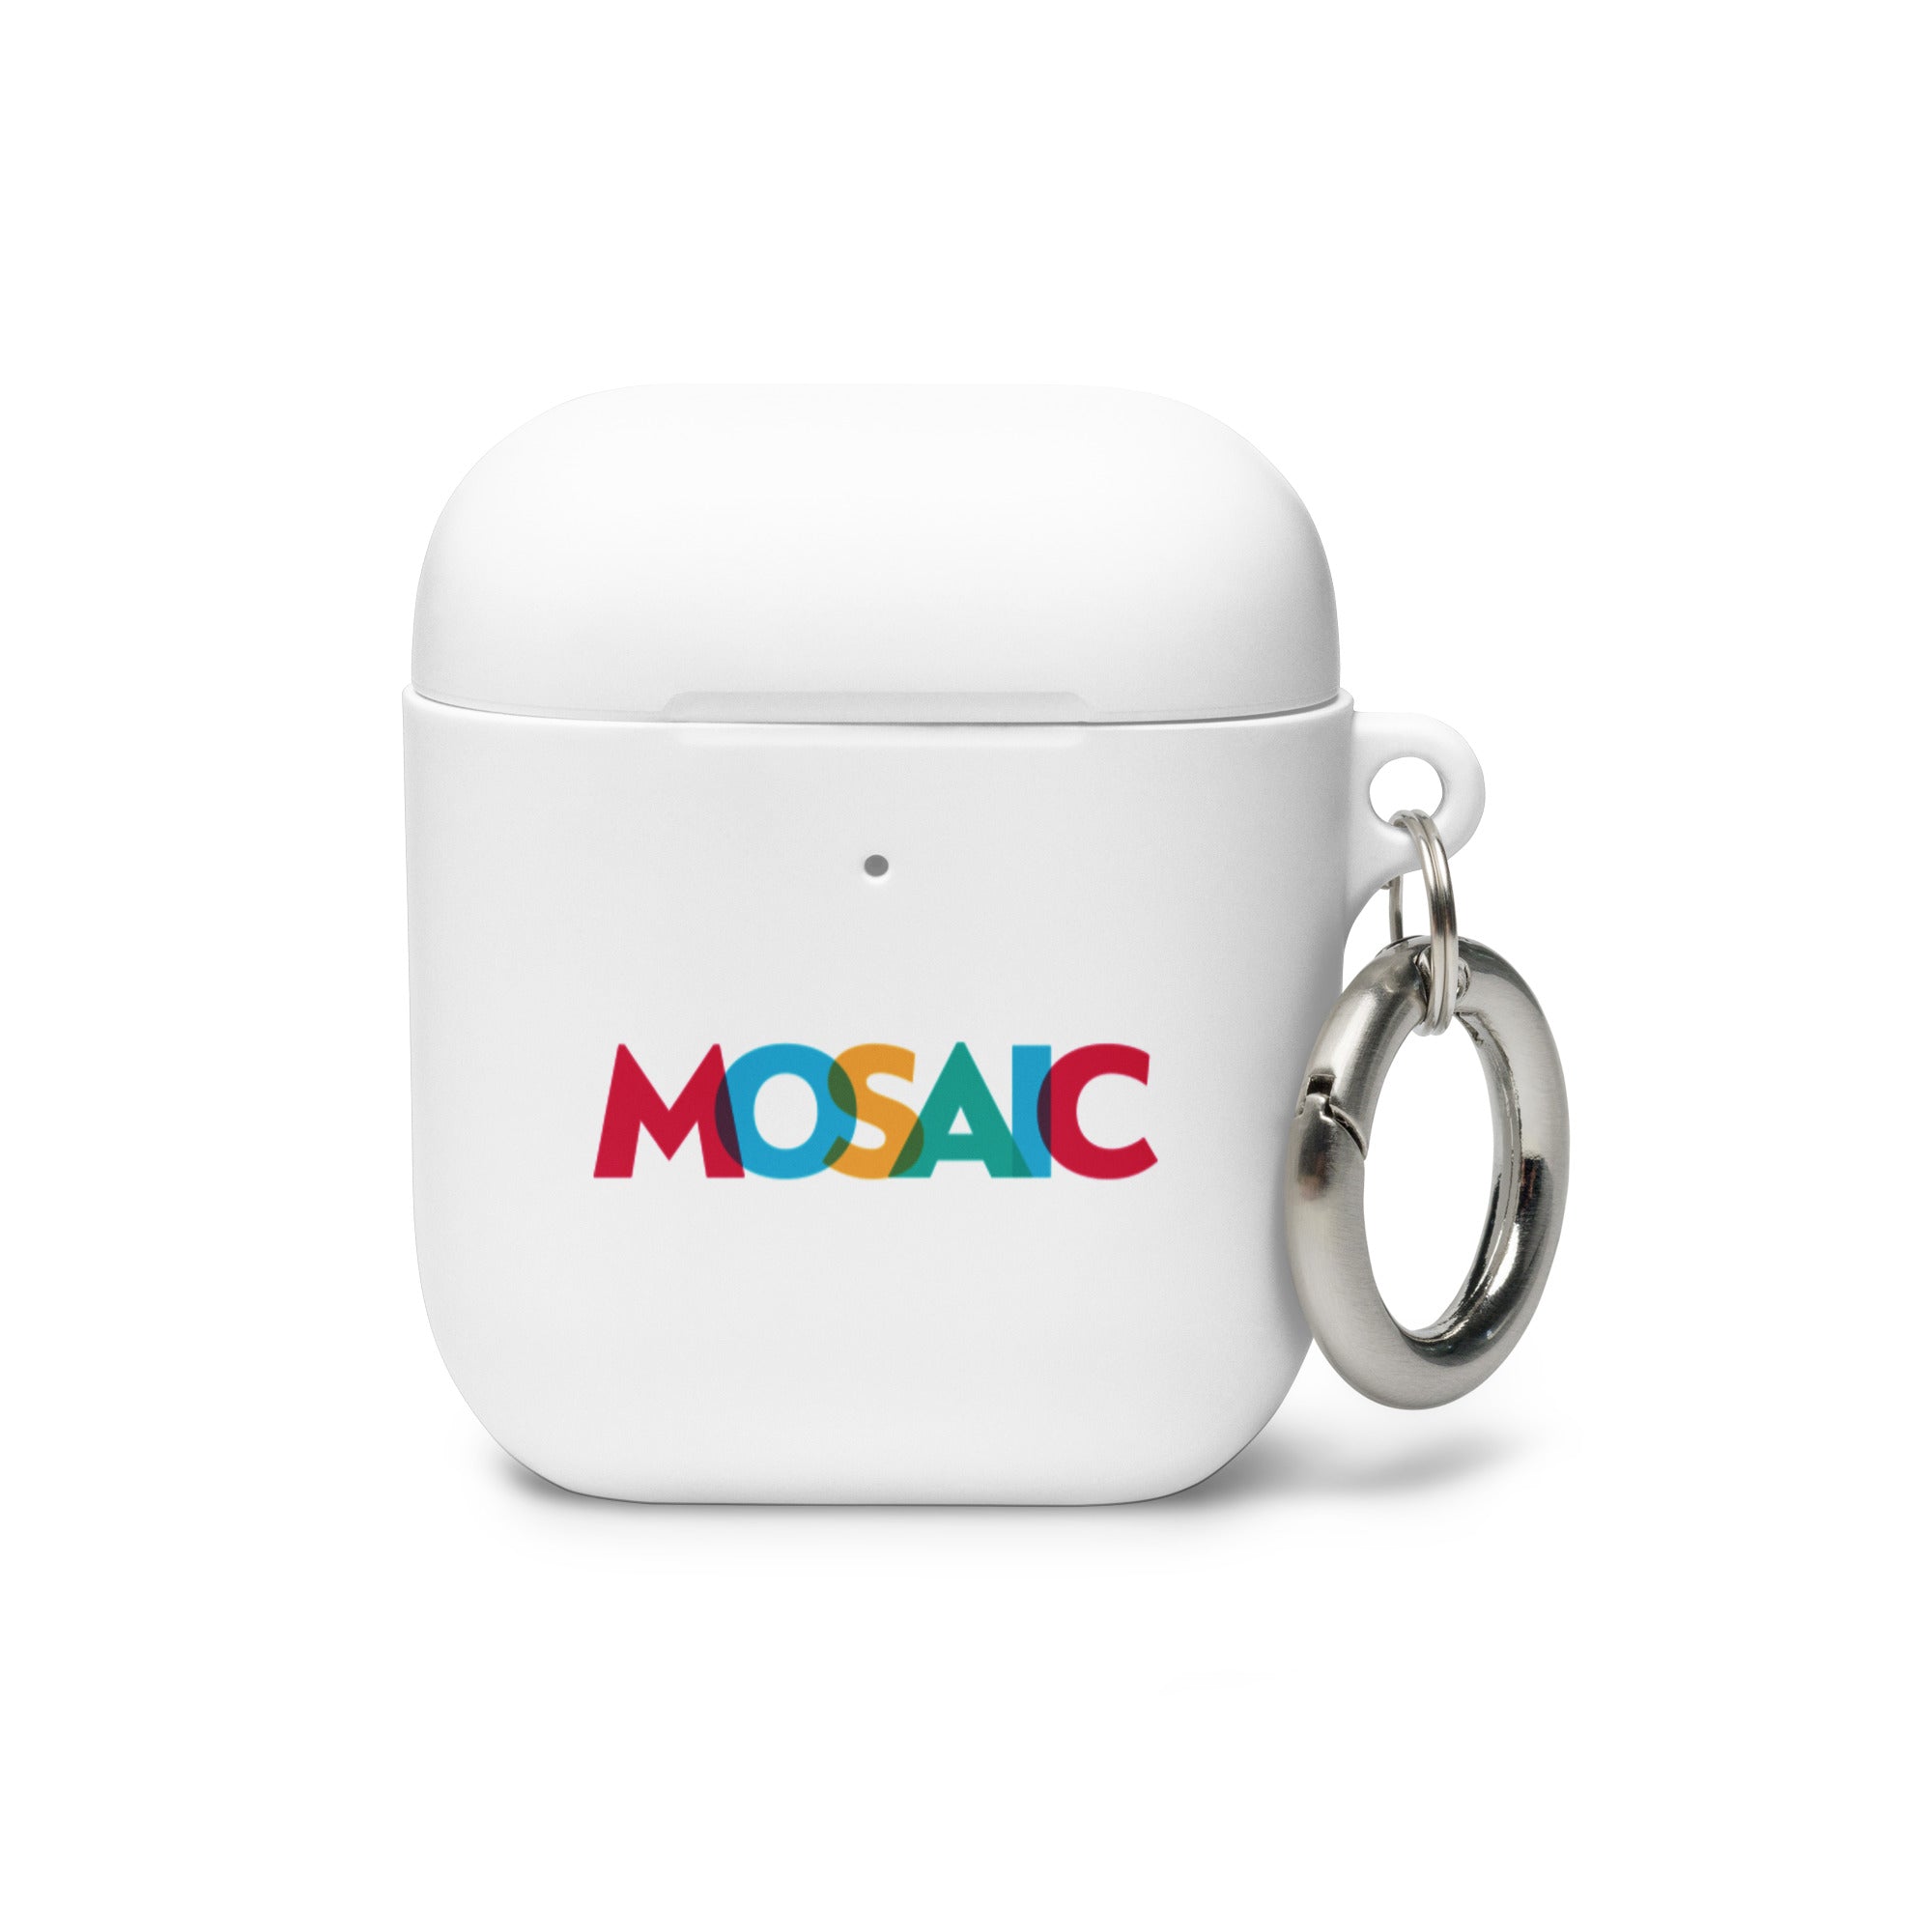 Mosaic: AirPods® Case Cover